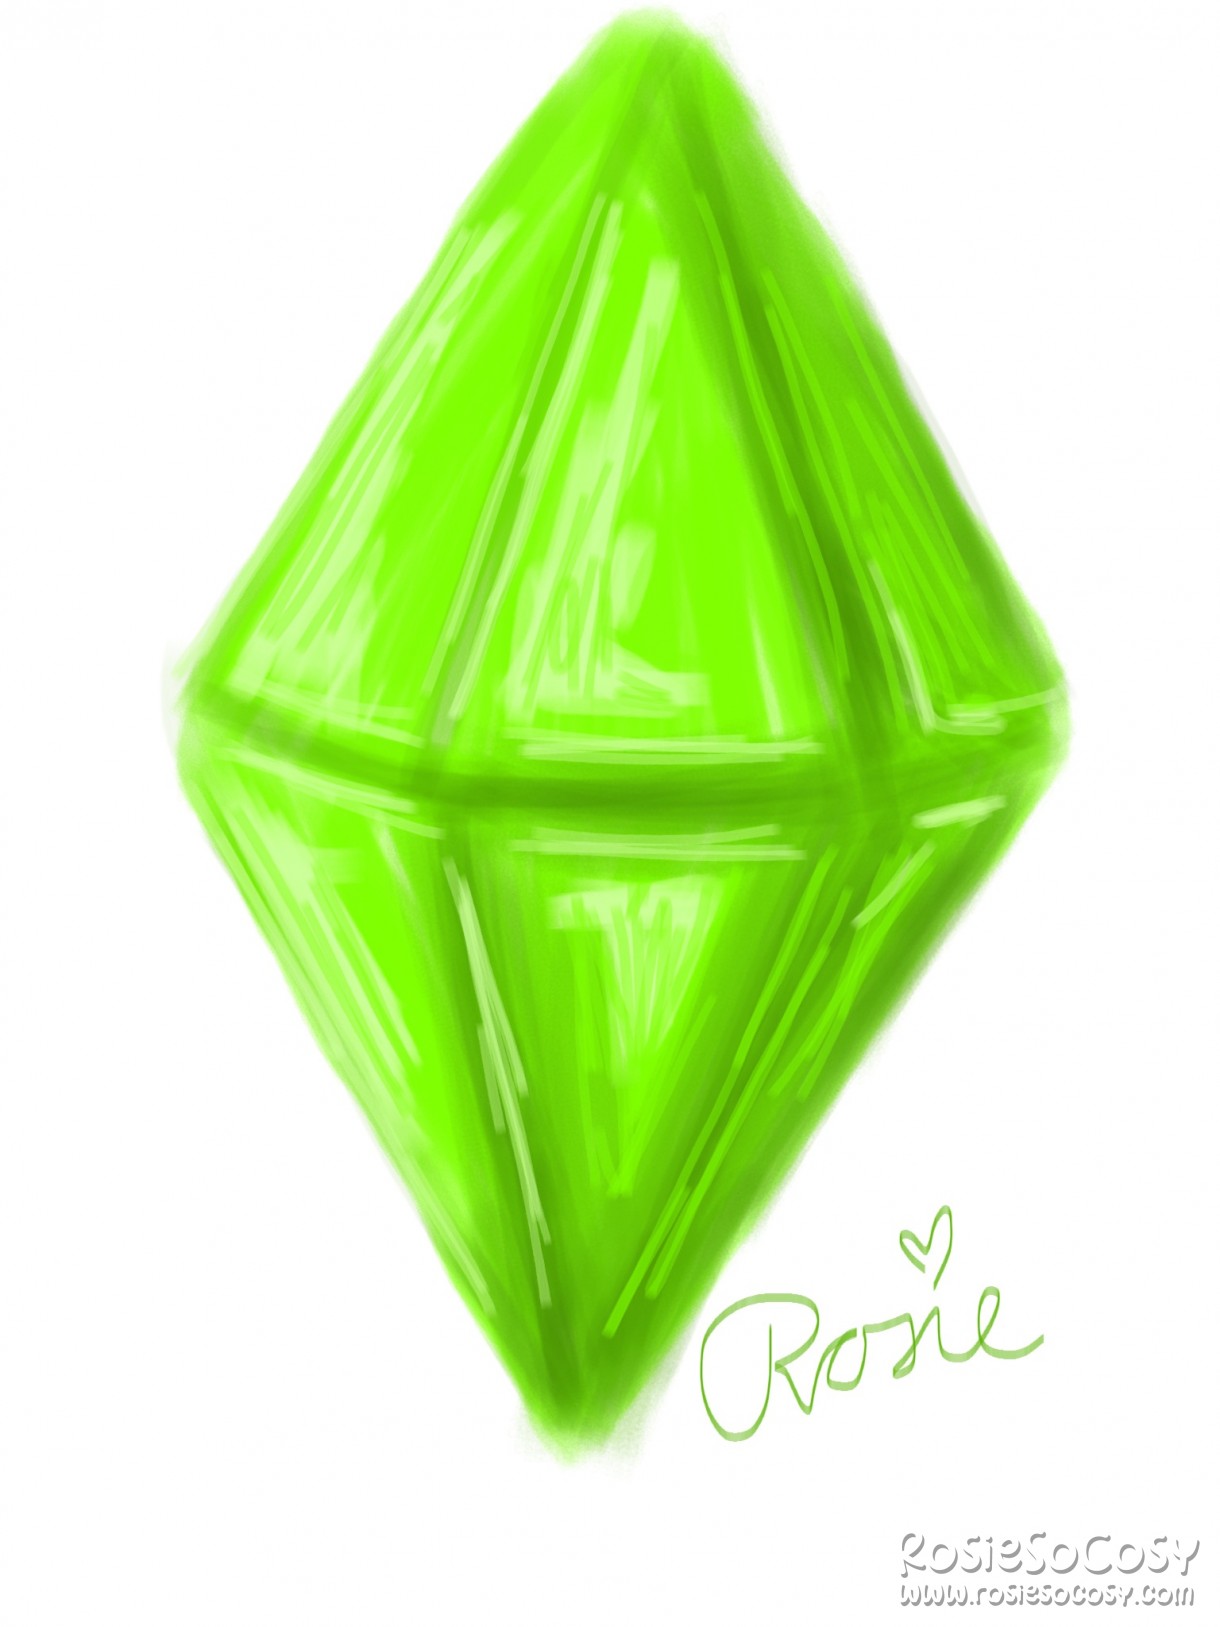 A big green plumbob from The Sims.